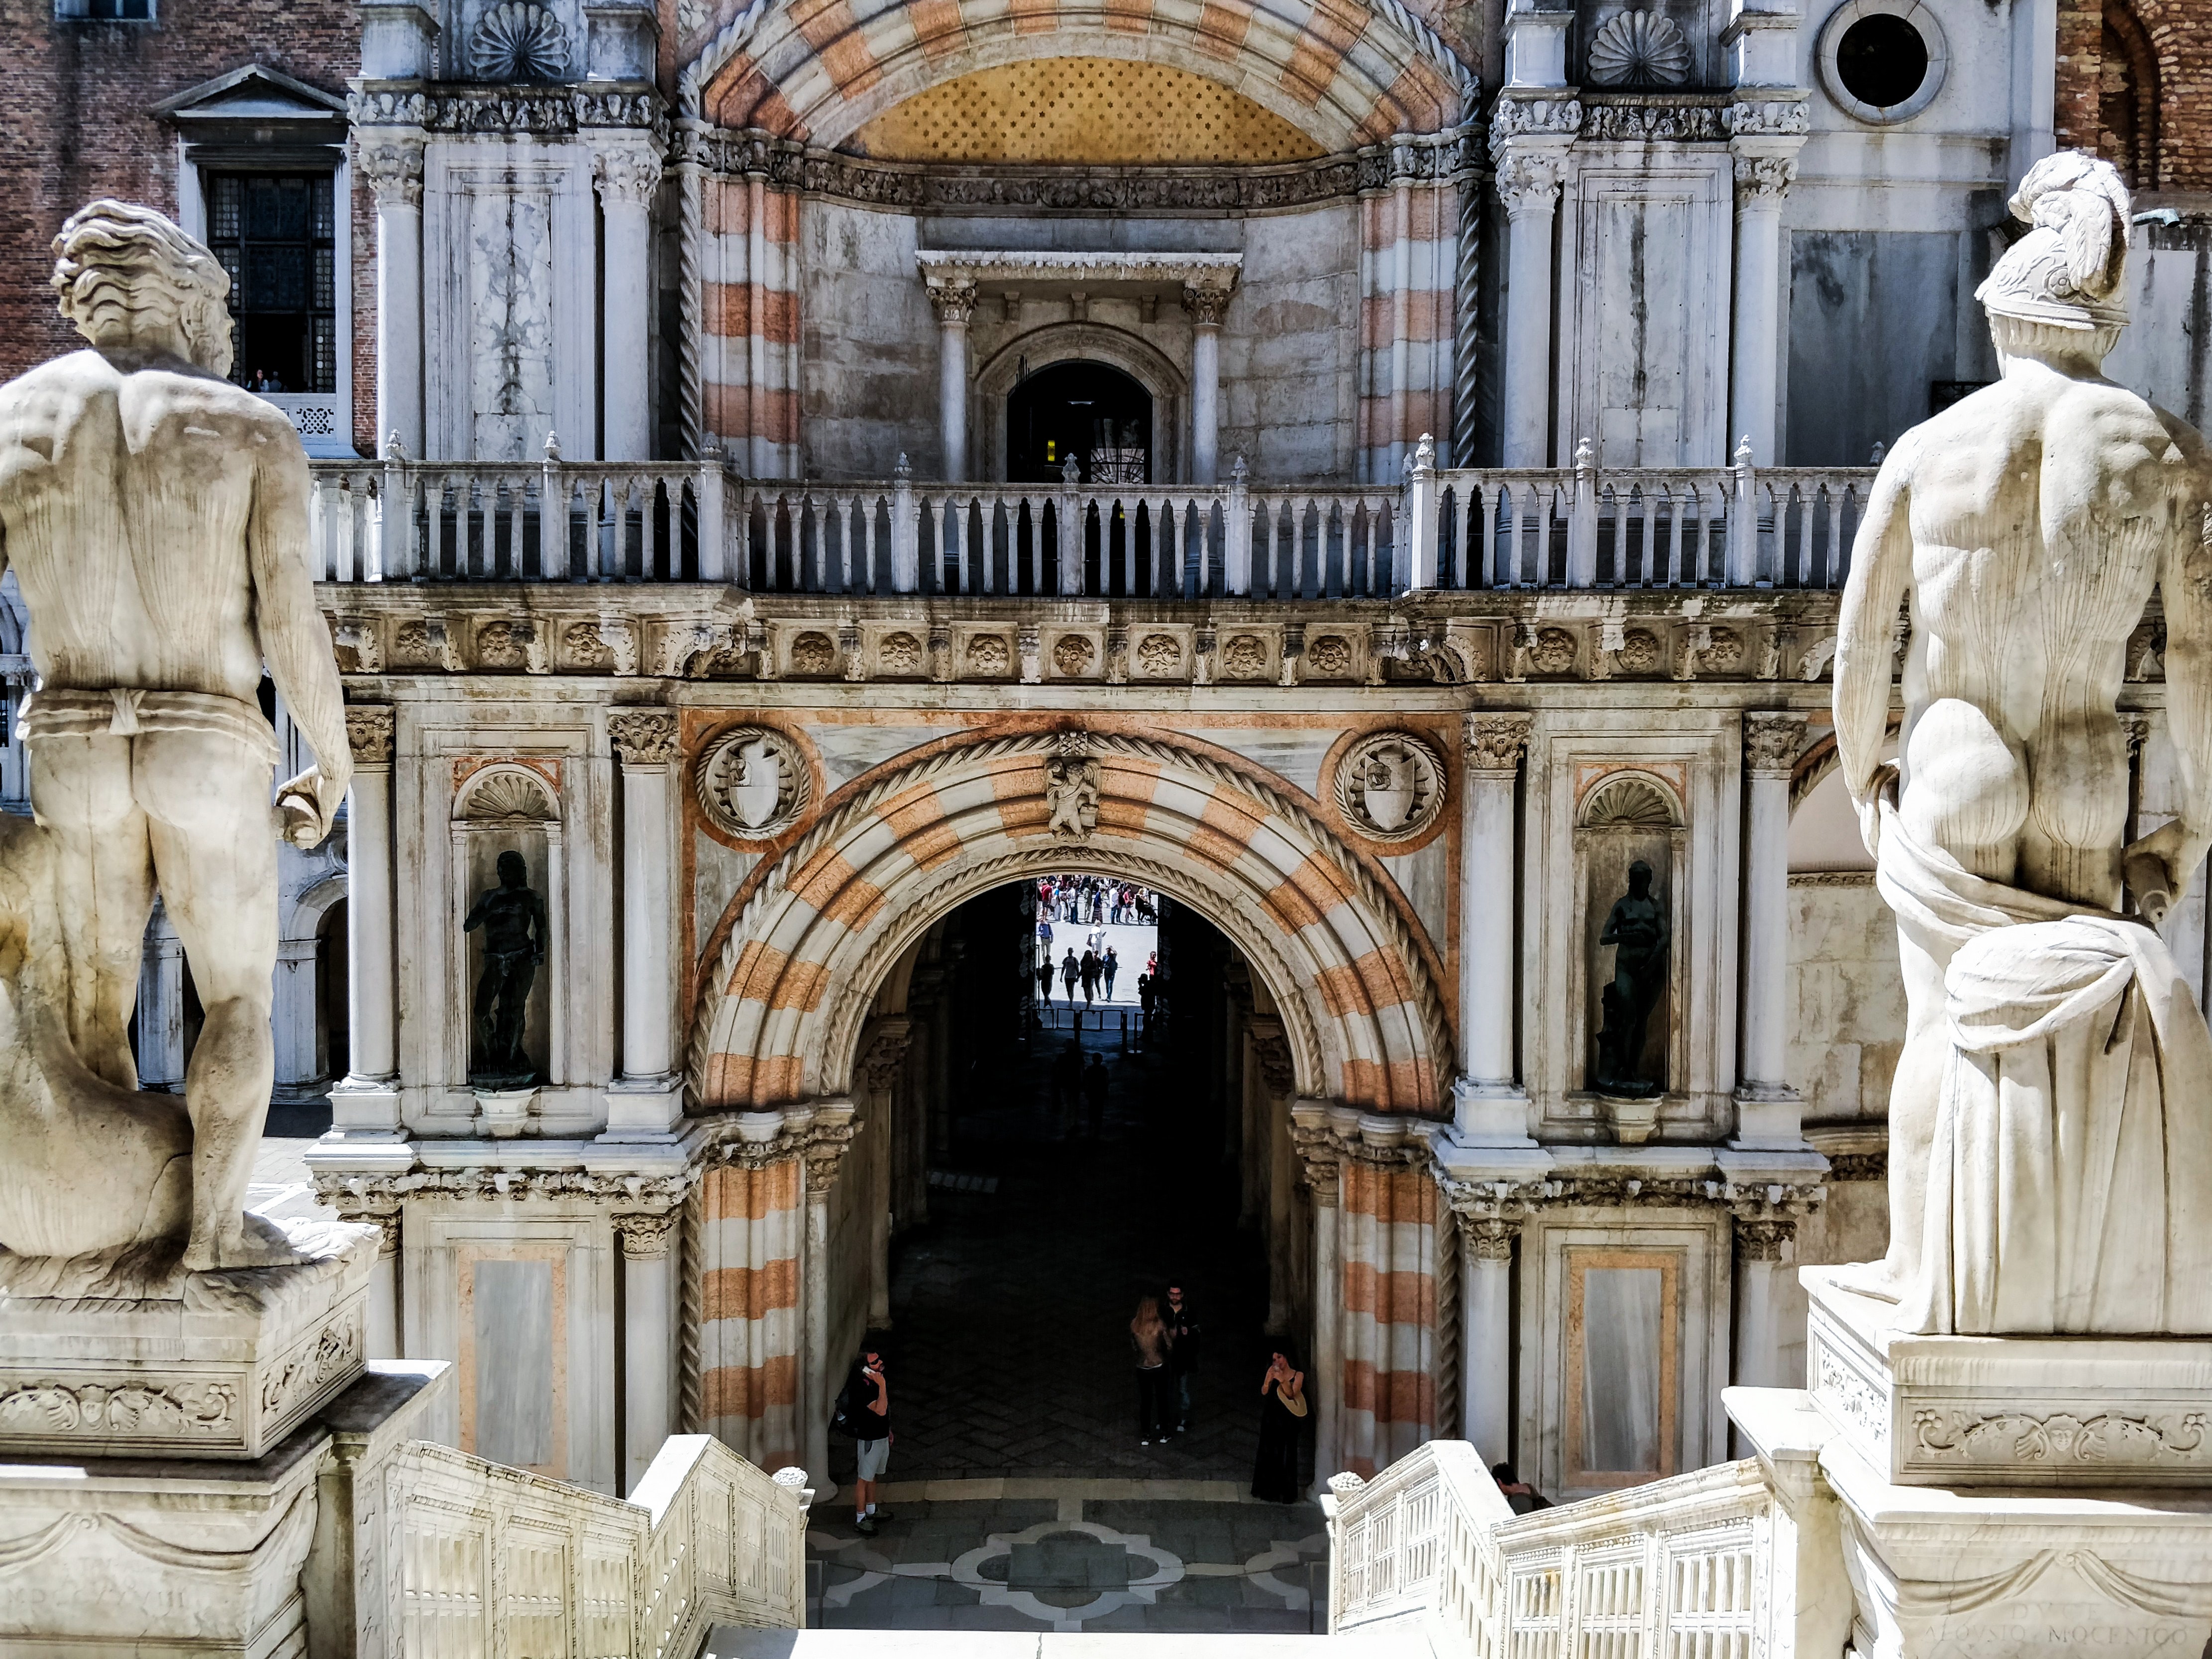 Doge Palace's Exterior, Italy